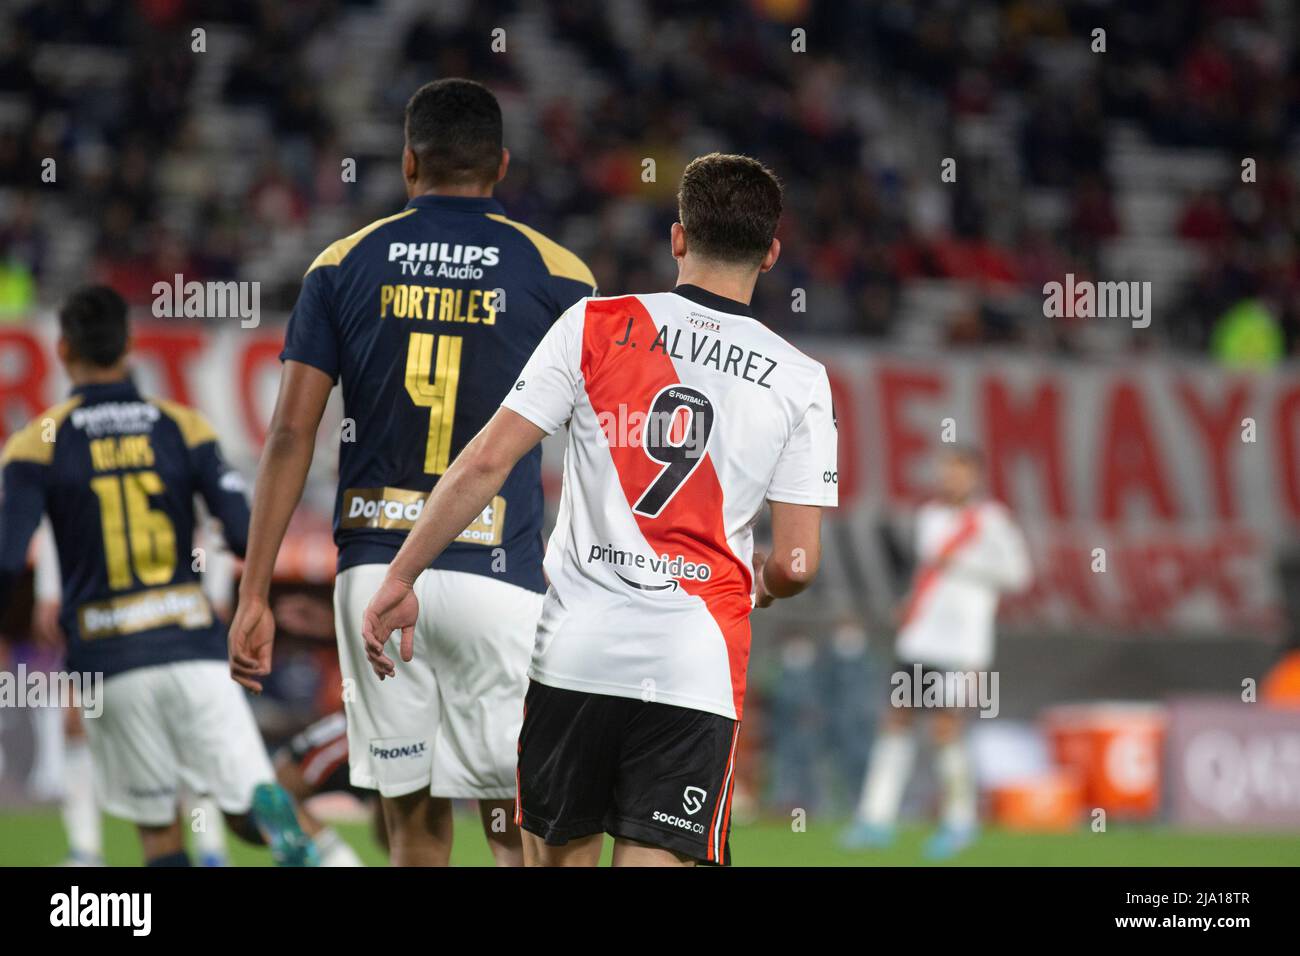 One of Latest games of Julian Alvarez, Football player from River Plate, Argentina. Stock Photo